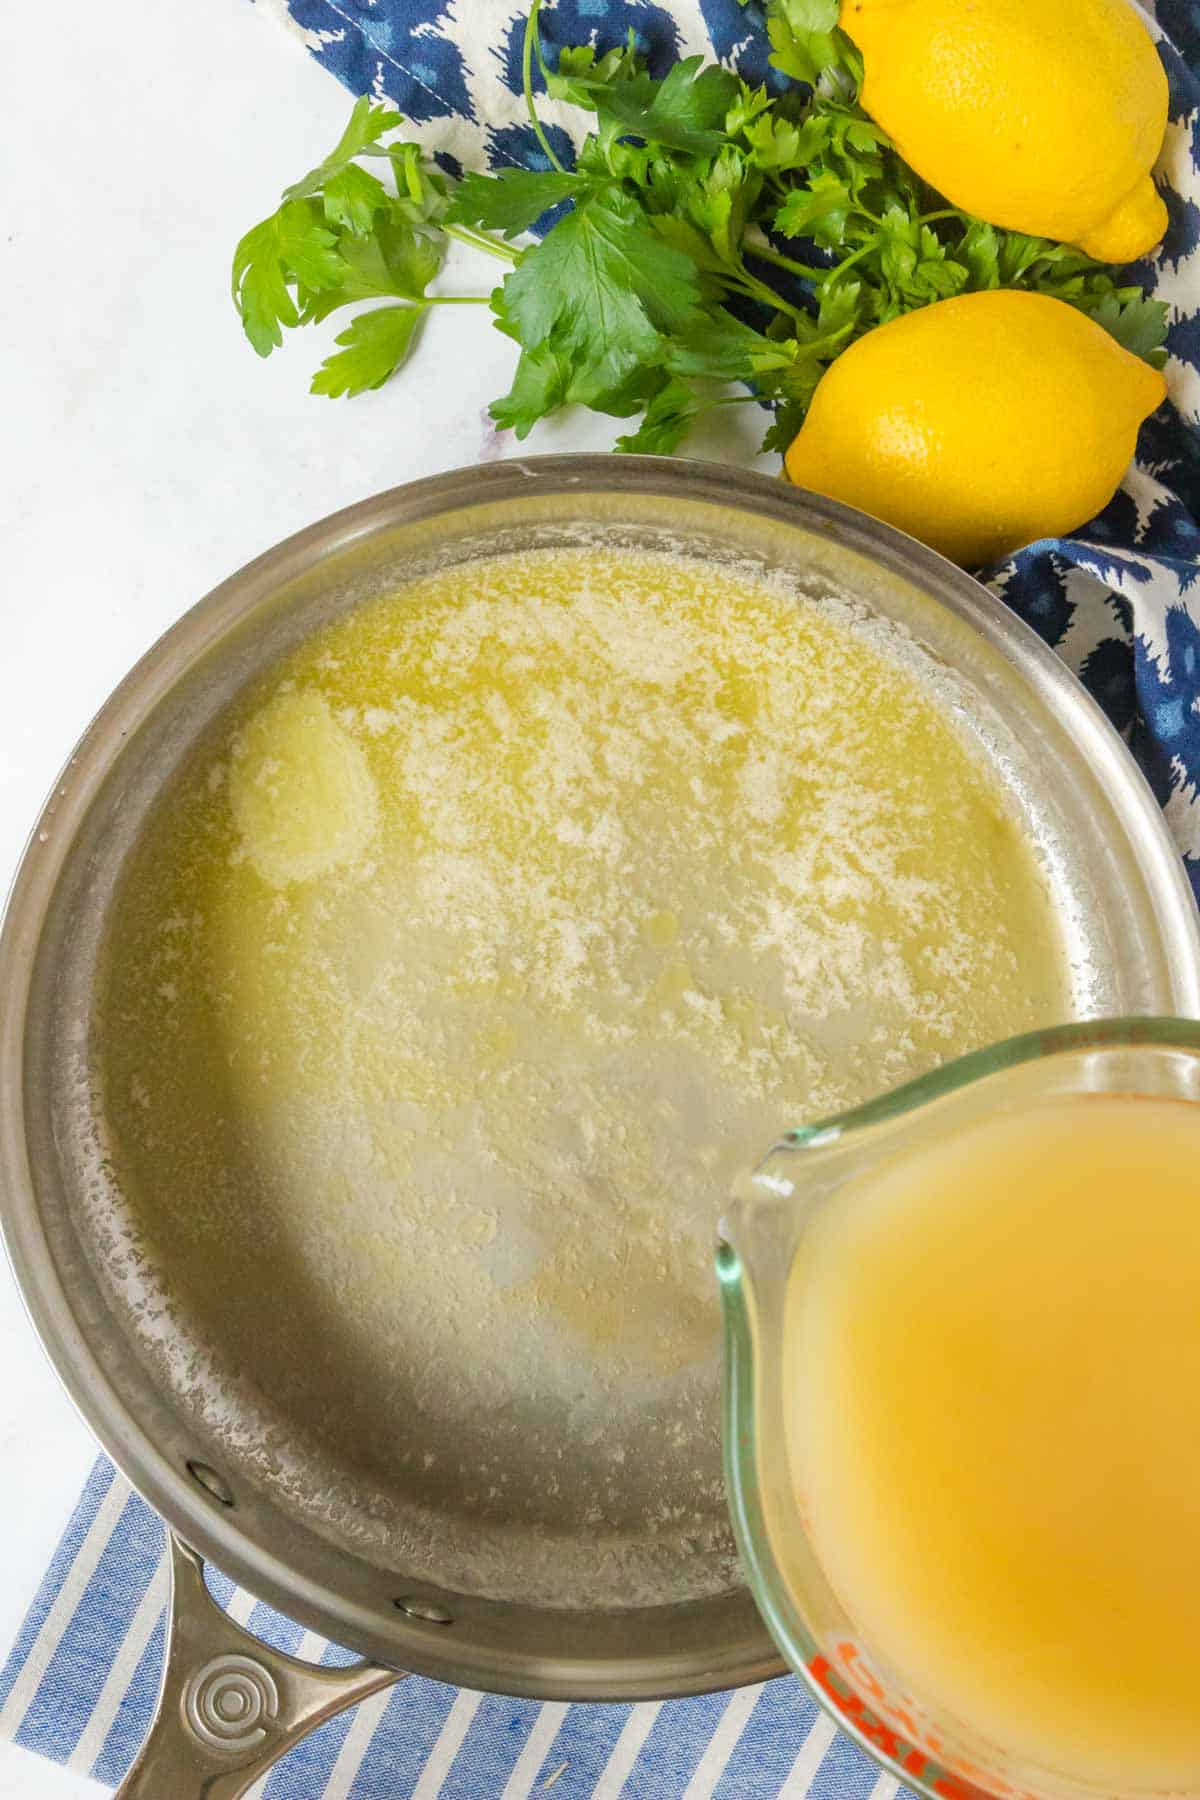 A cornstarch and chicken broth slurry being poured into a skillet full of melted butter